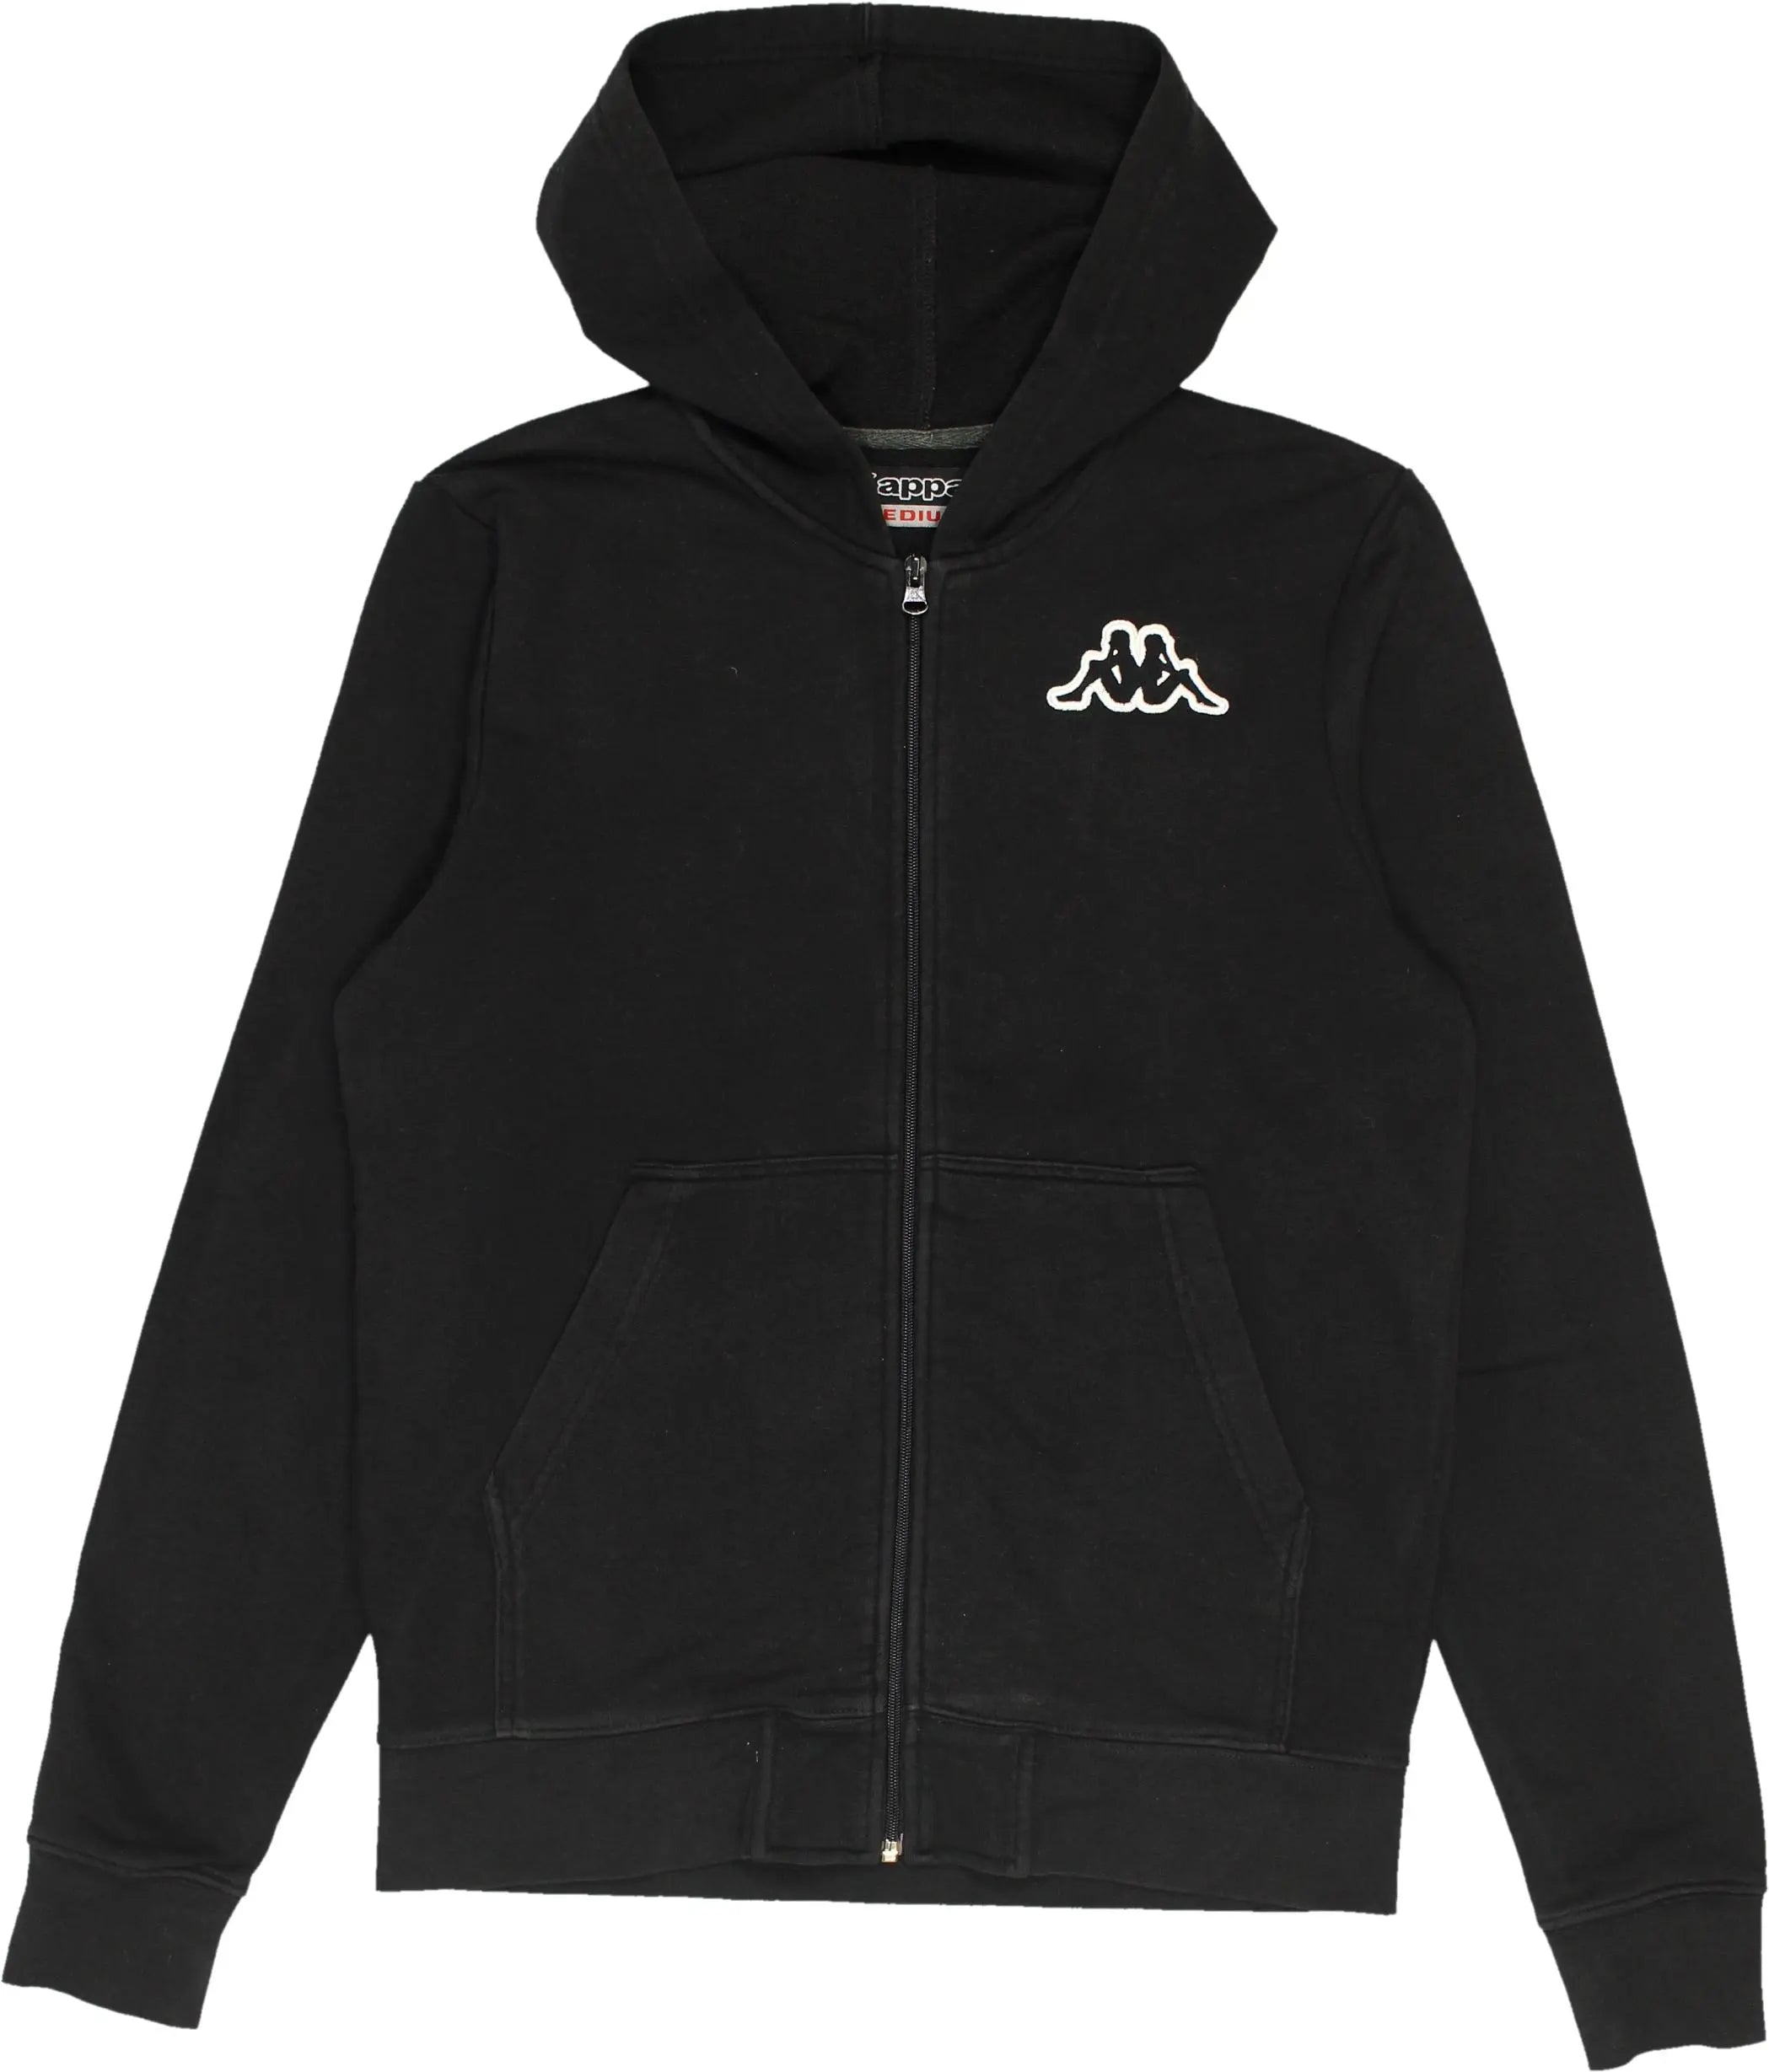 Kappa - Zip Up Hoodie by Kappa- ThriftTale.com - Vintage and second handclothing